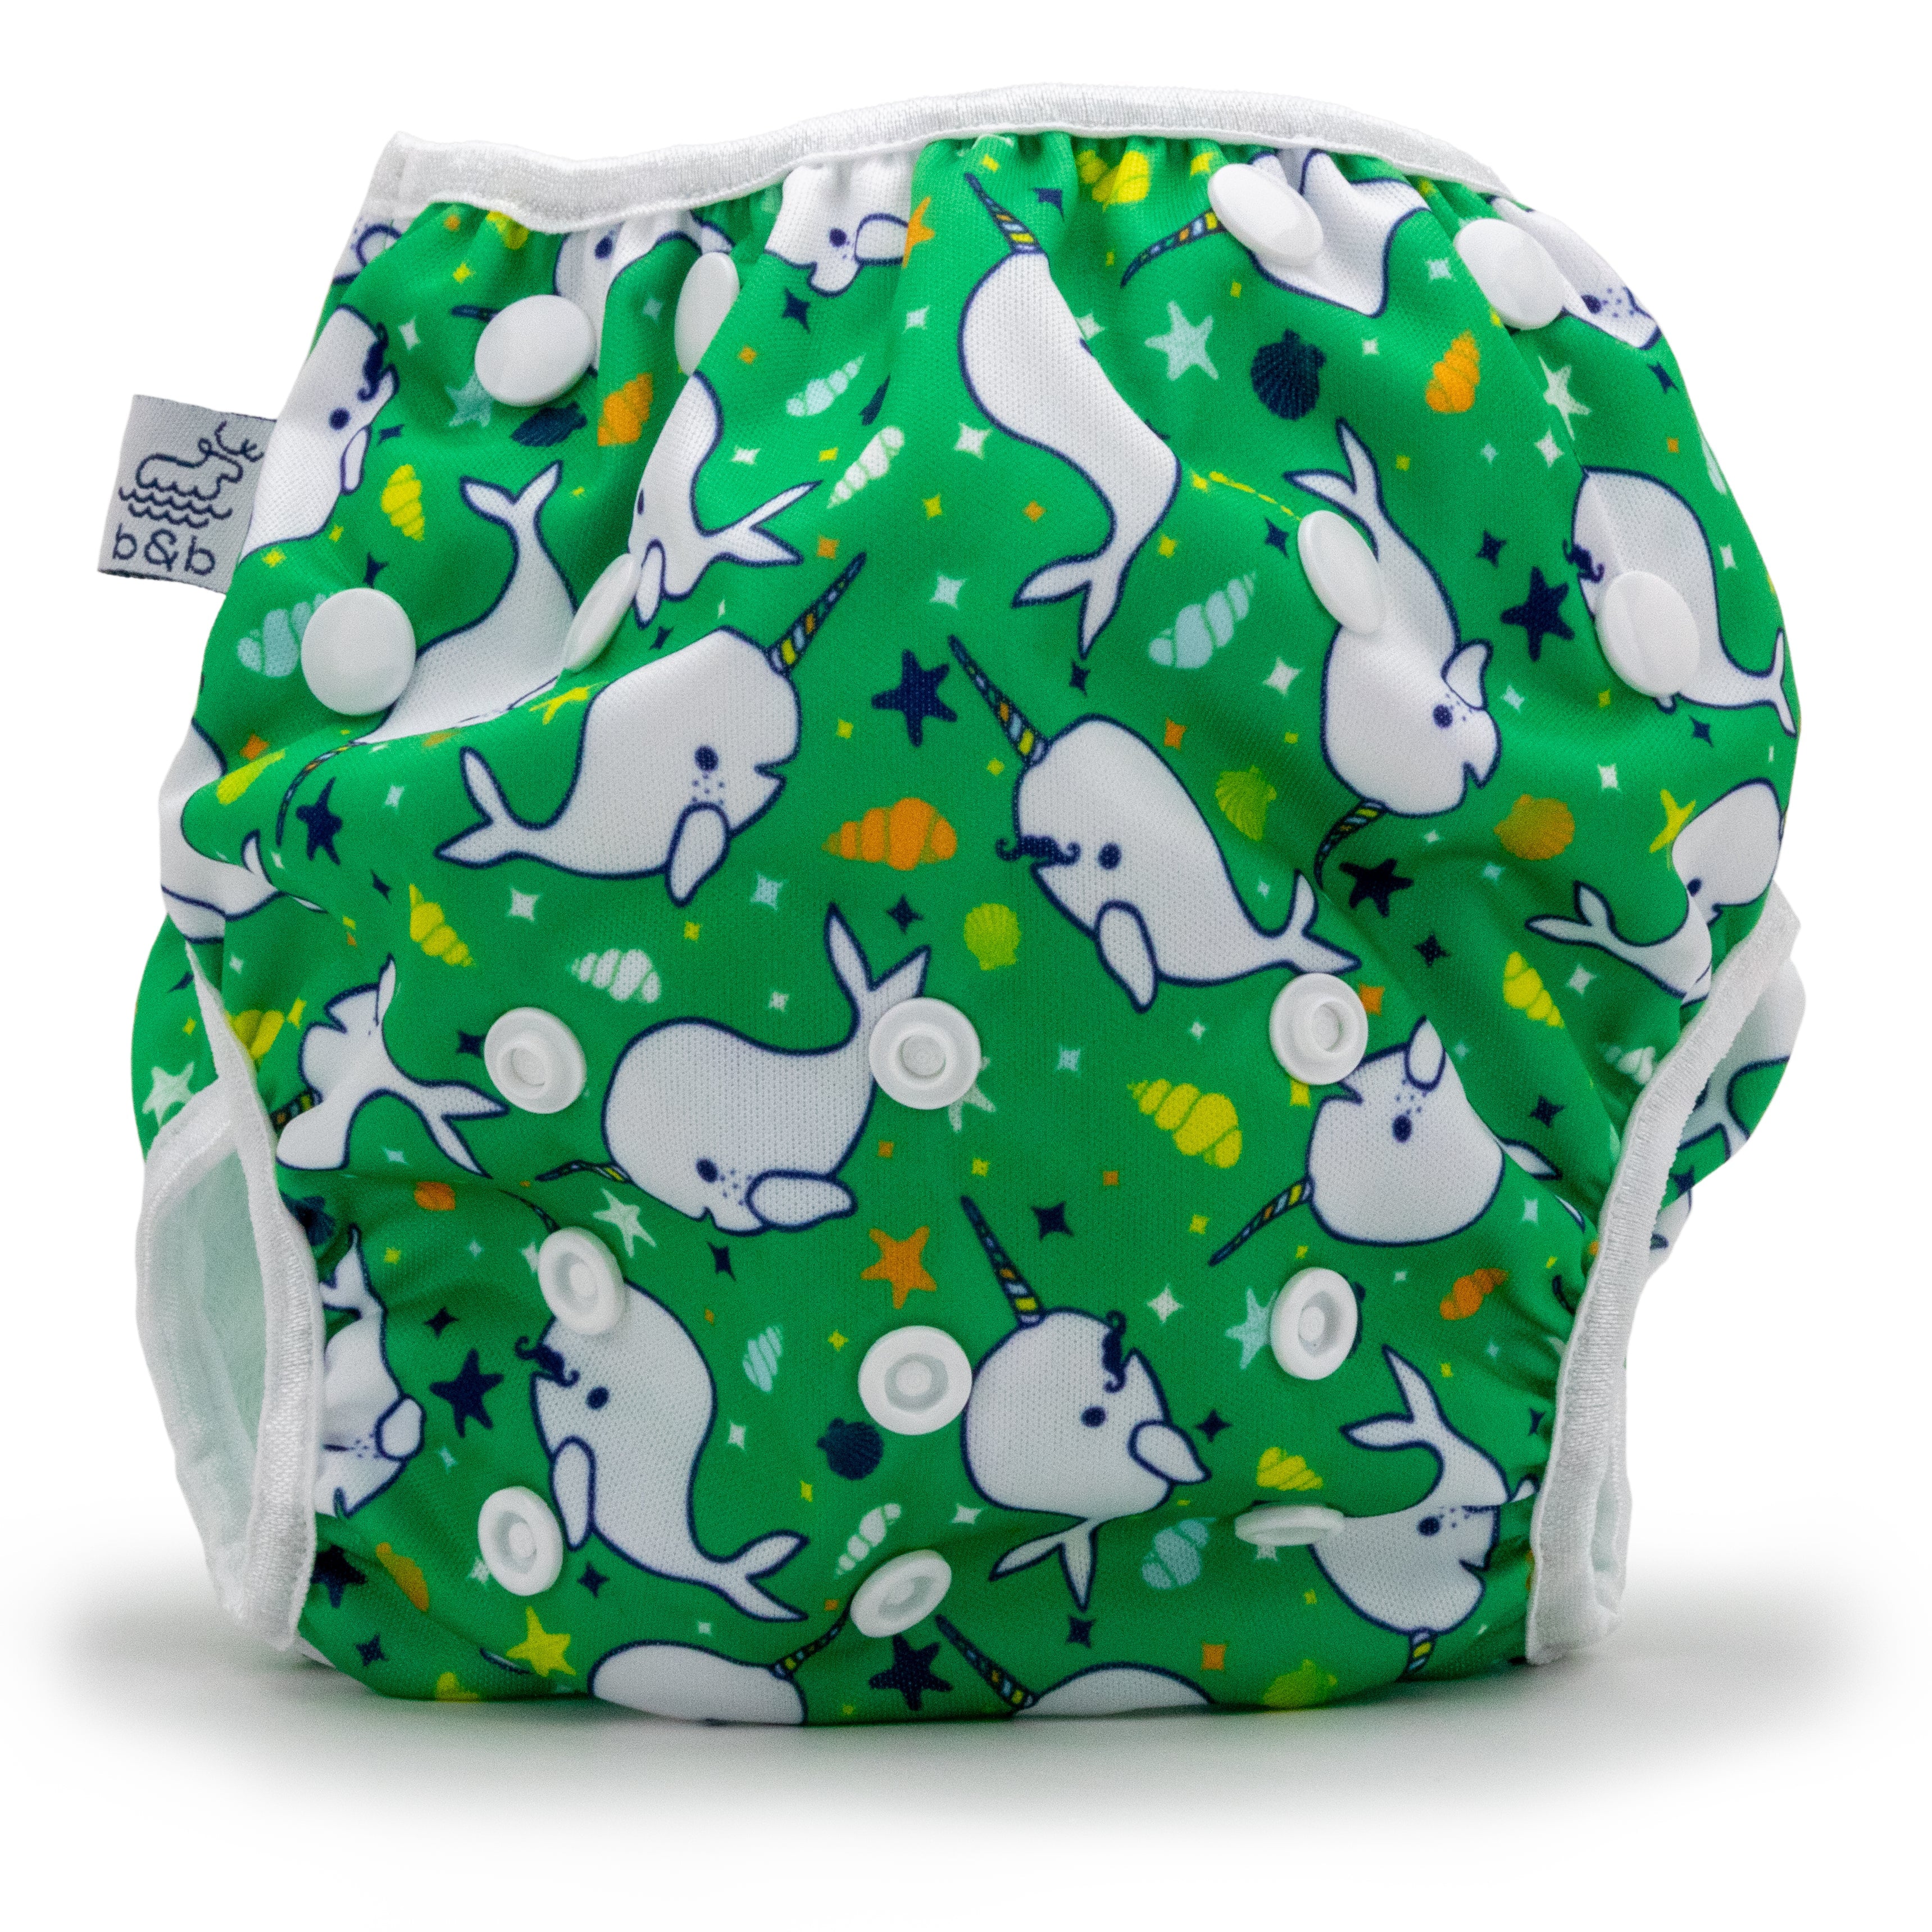 Narwhals 0-3 years Nageuret  Swim Diaper (Green) by Beau & Belle Littles